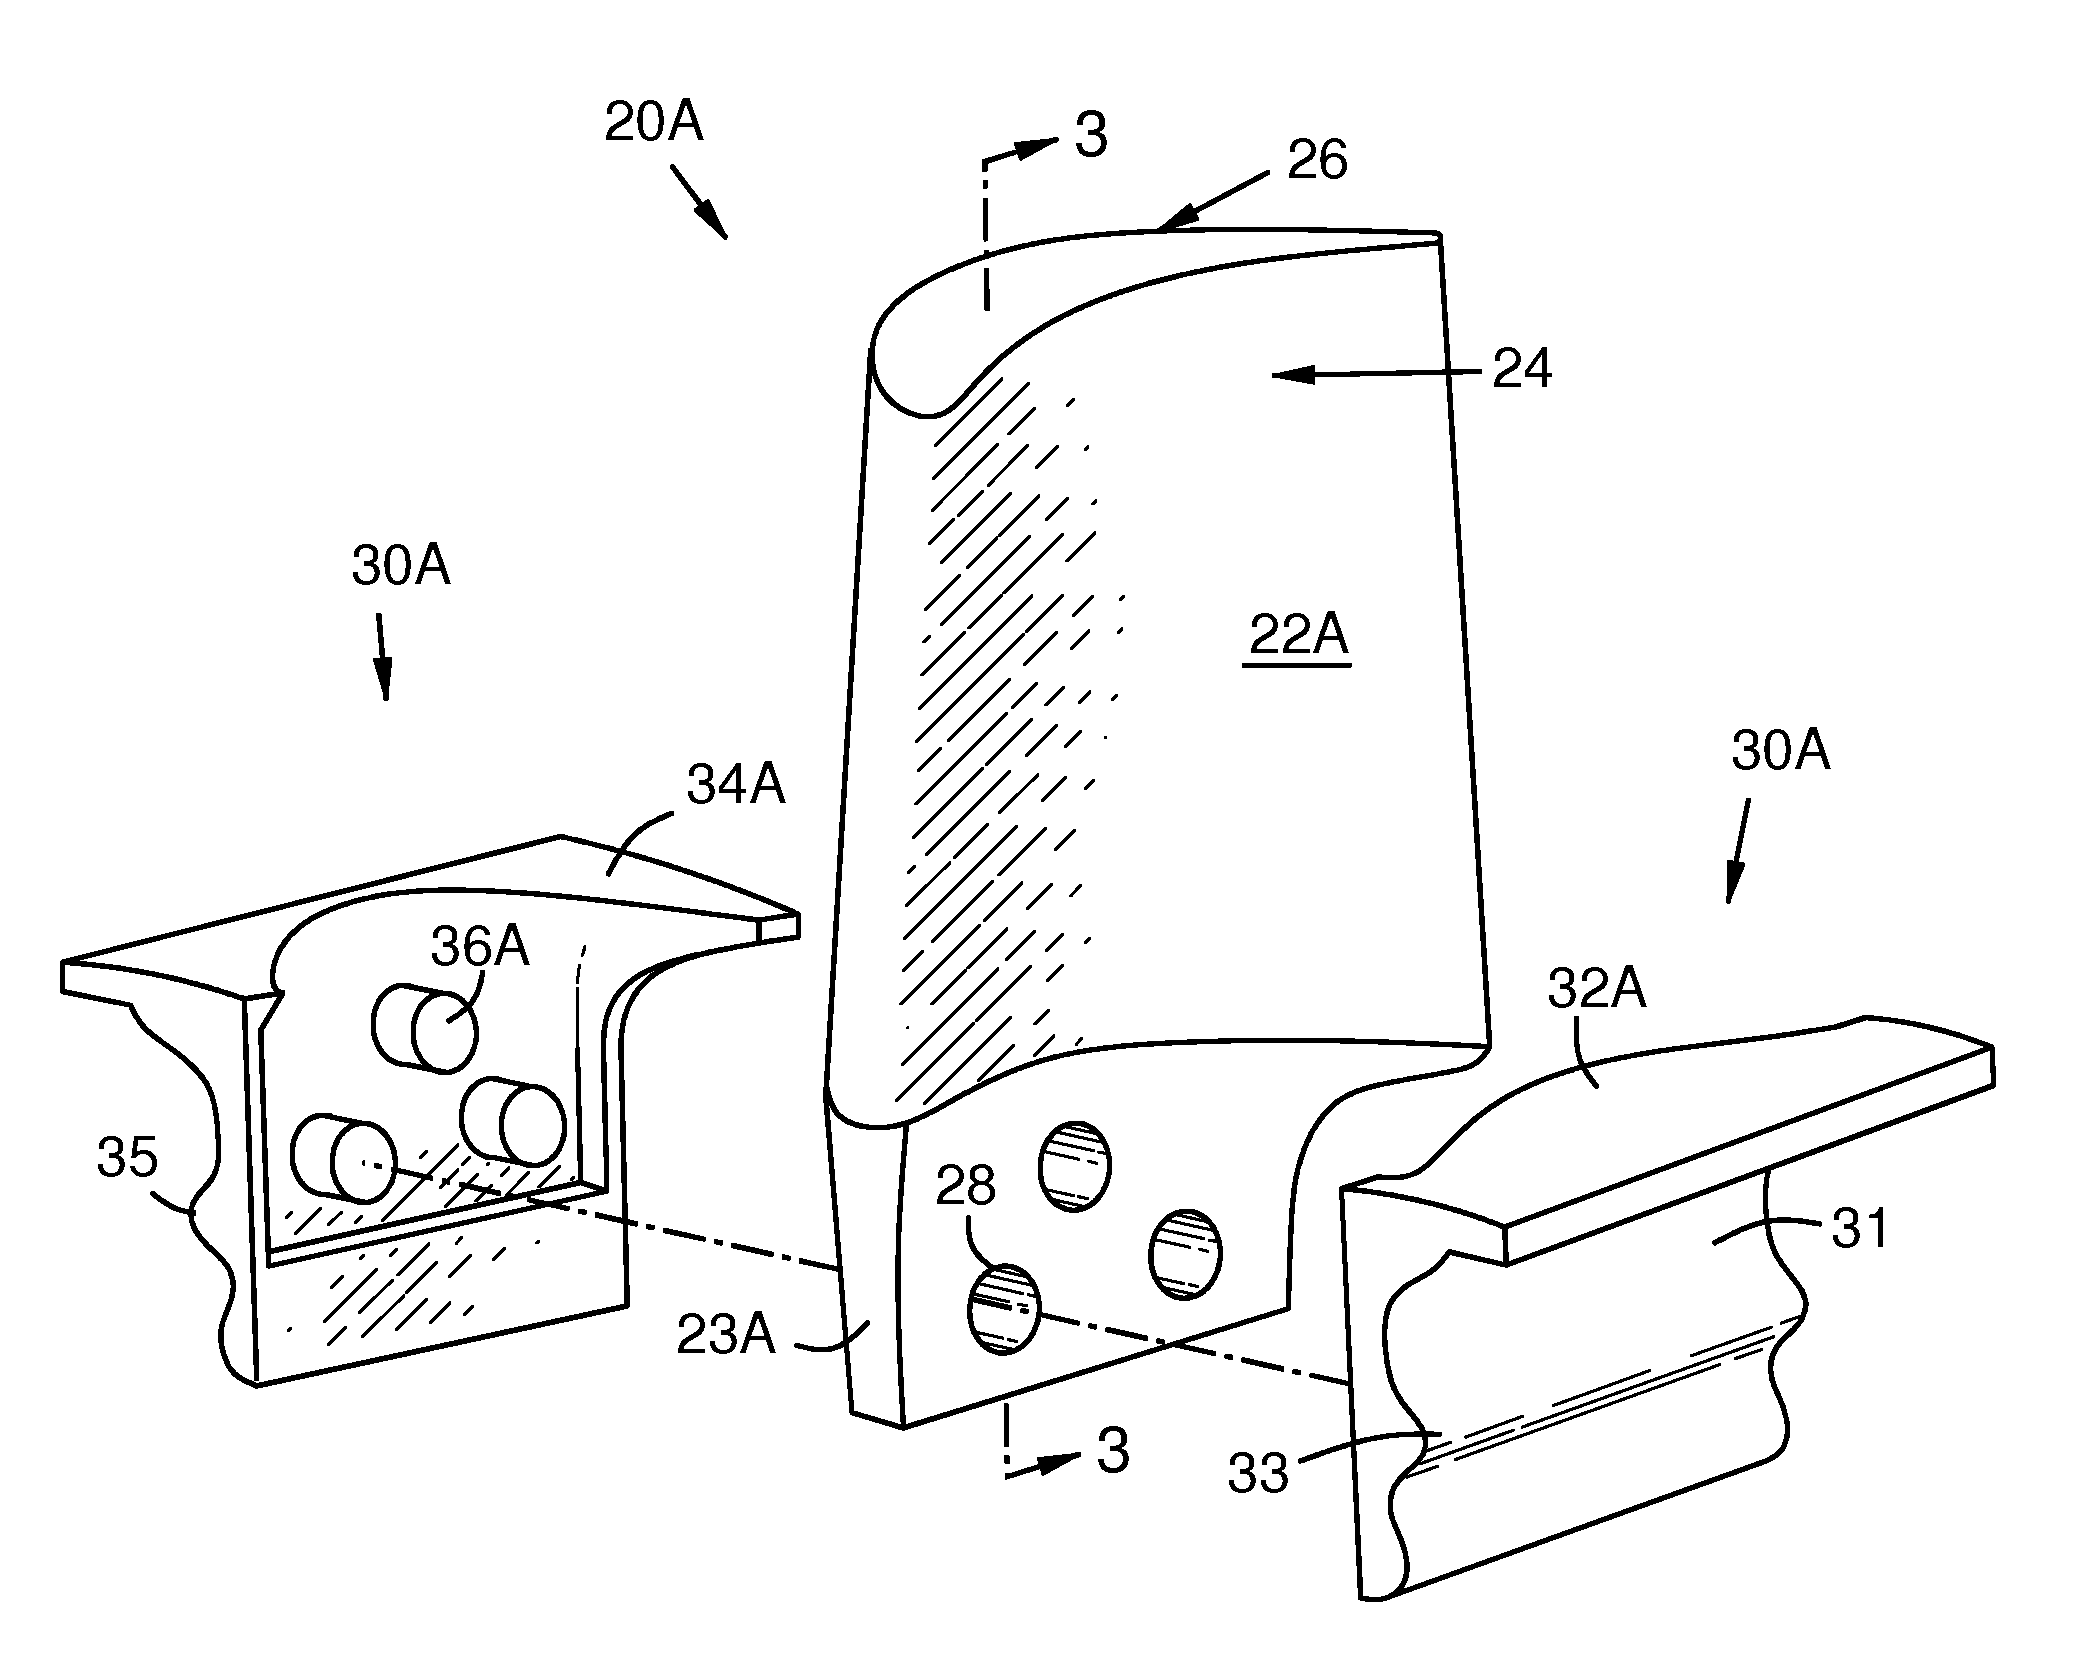 Turbine engine airfoil and platform assembly